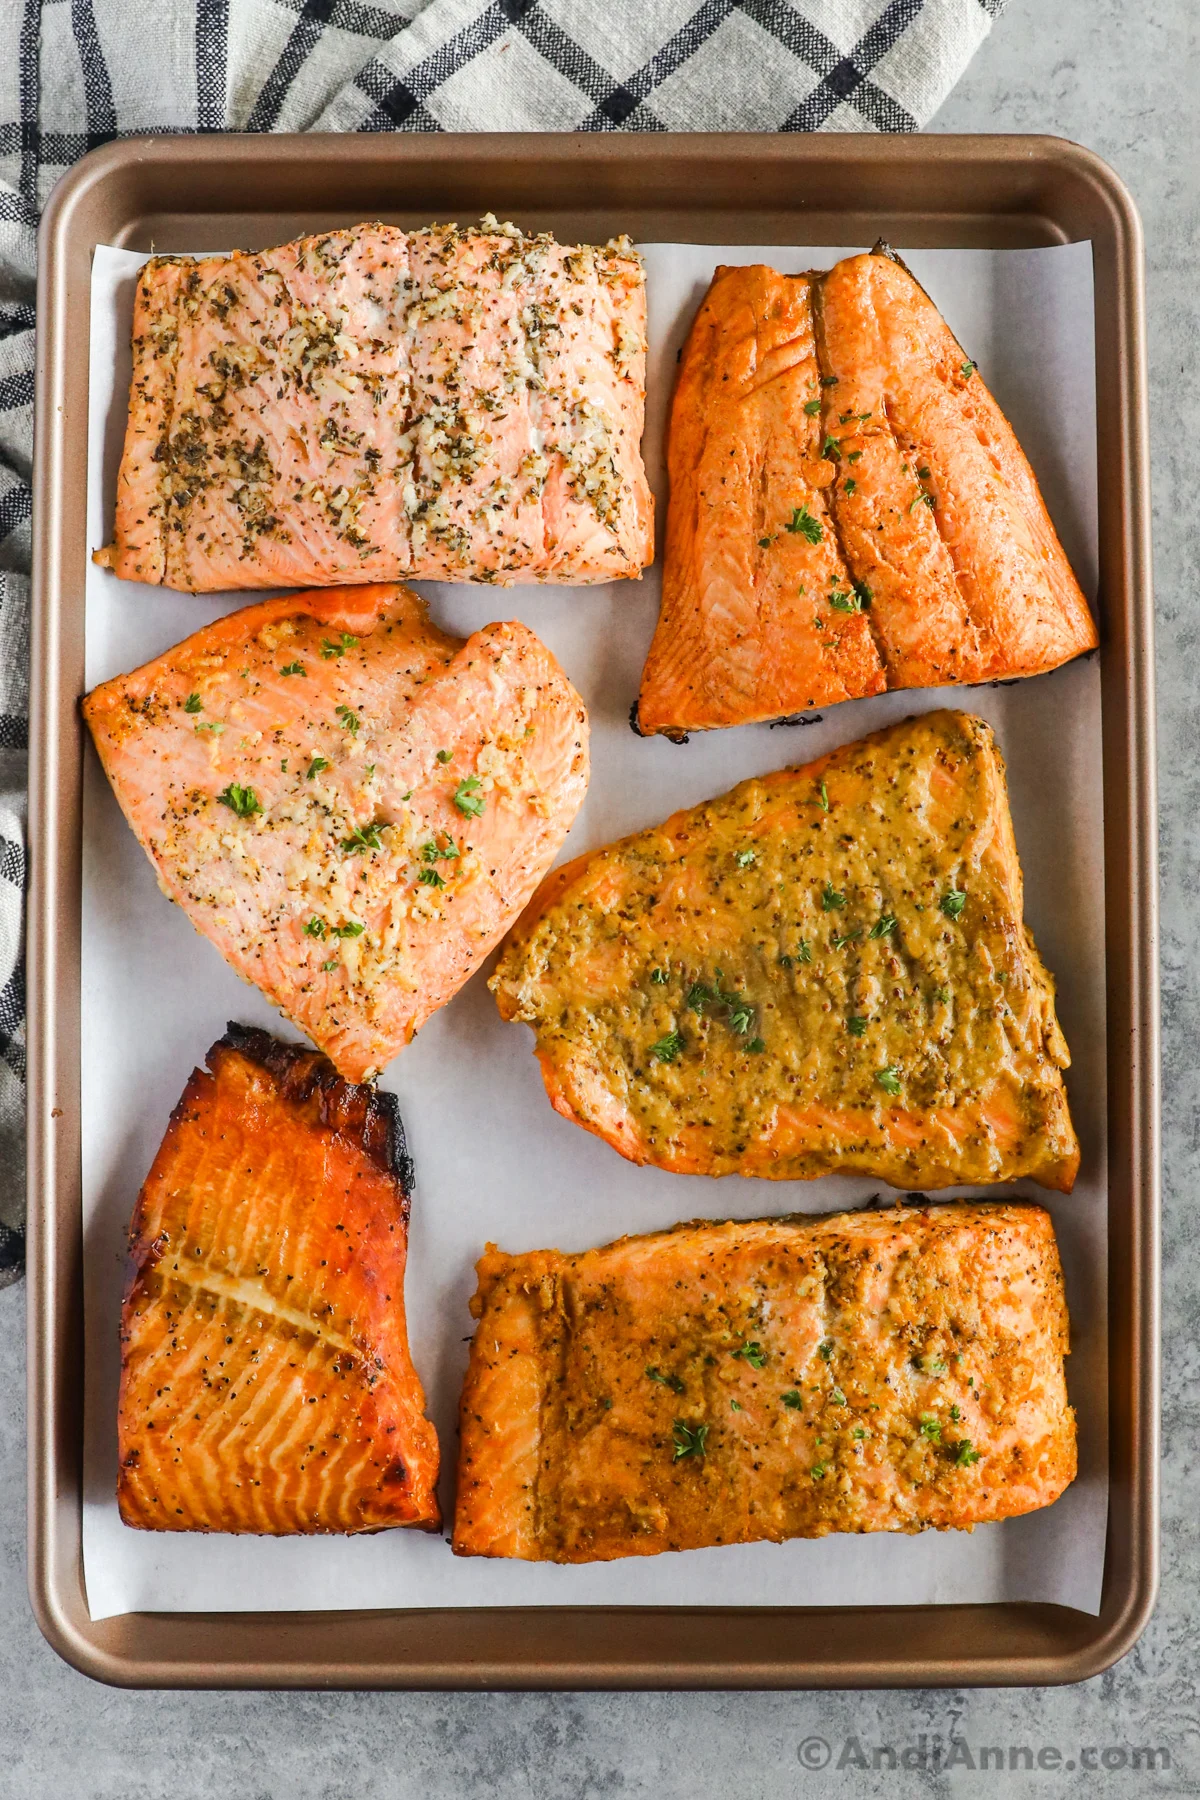 Six cooked salmon fillets coated in different seasonings on a baking sheet.